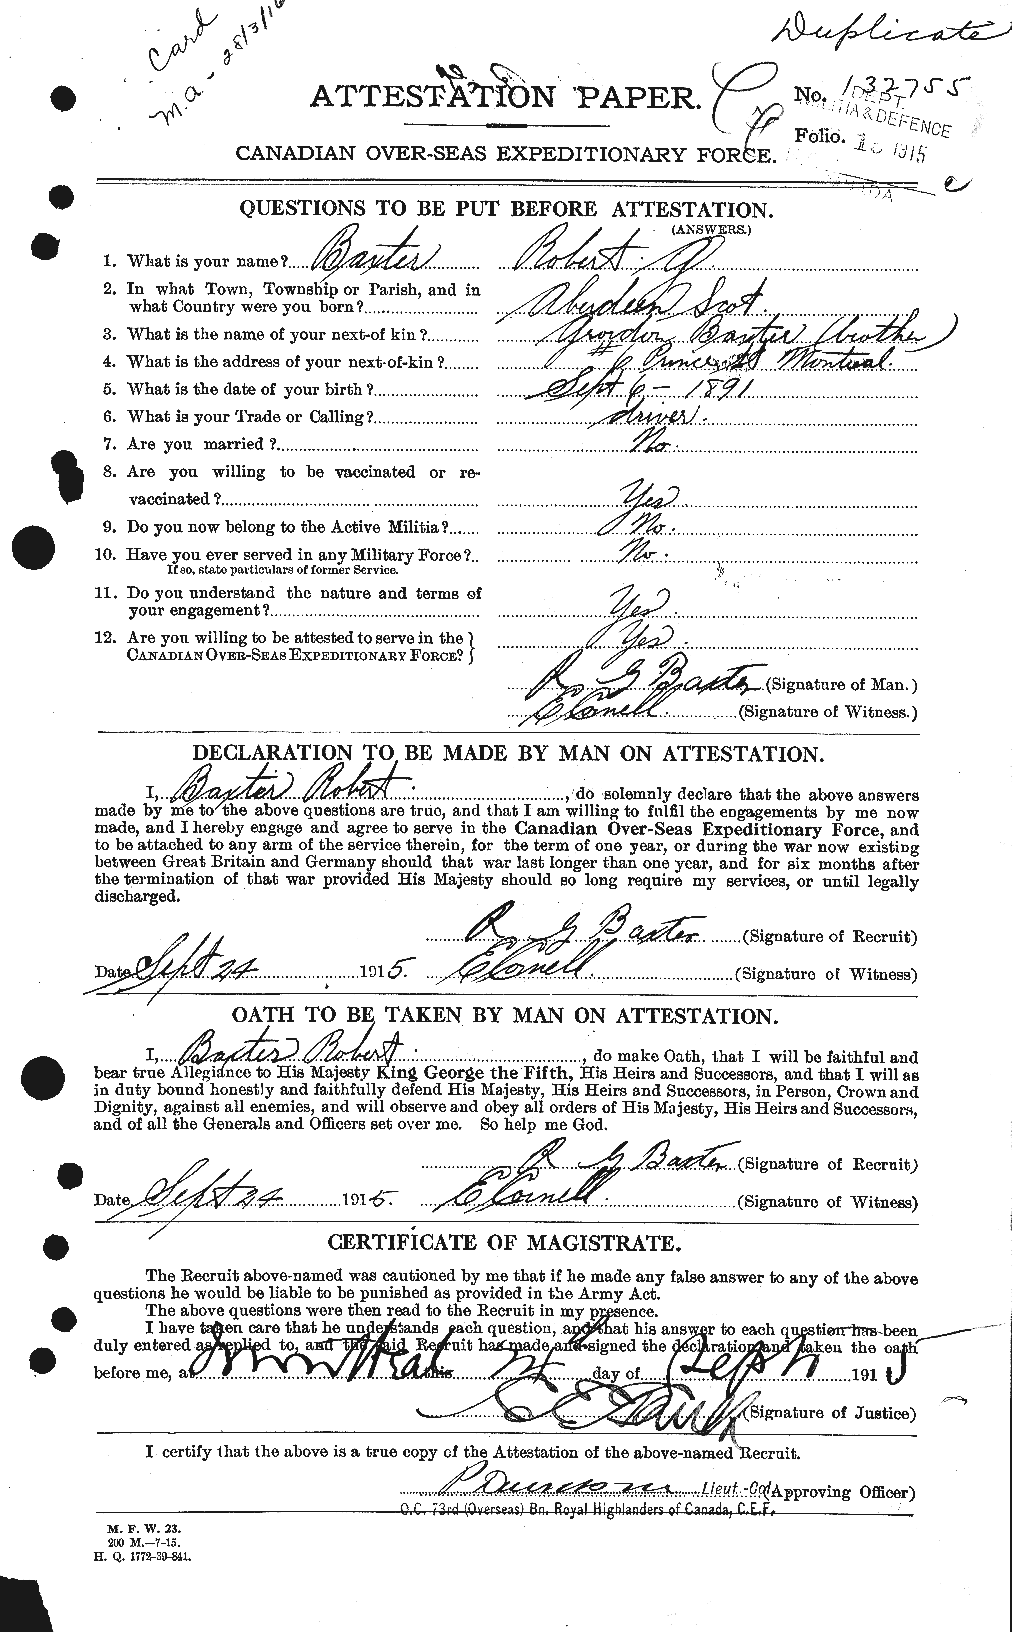 Personnel Records of the First World War - CEF 229495a